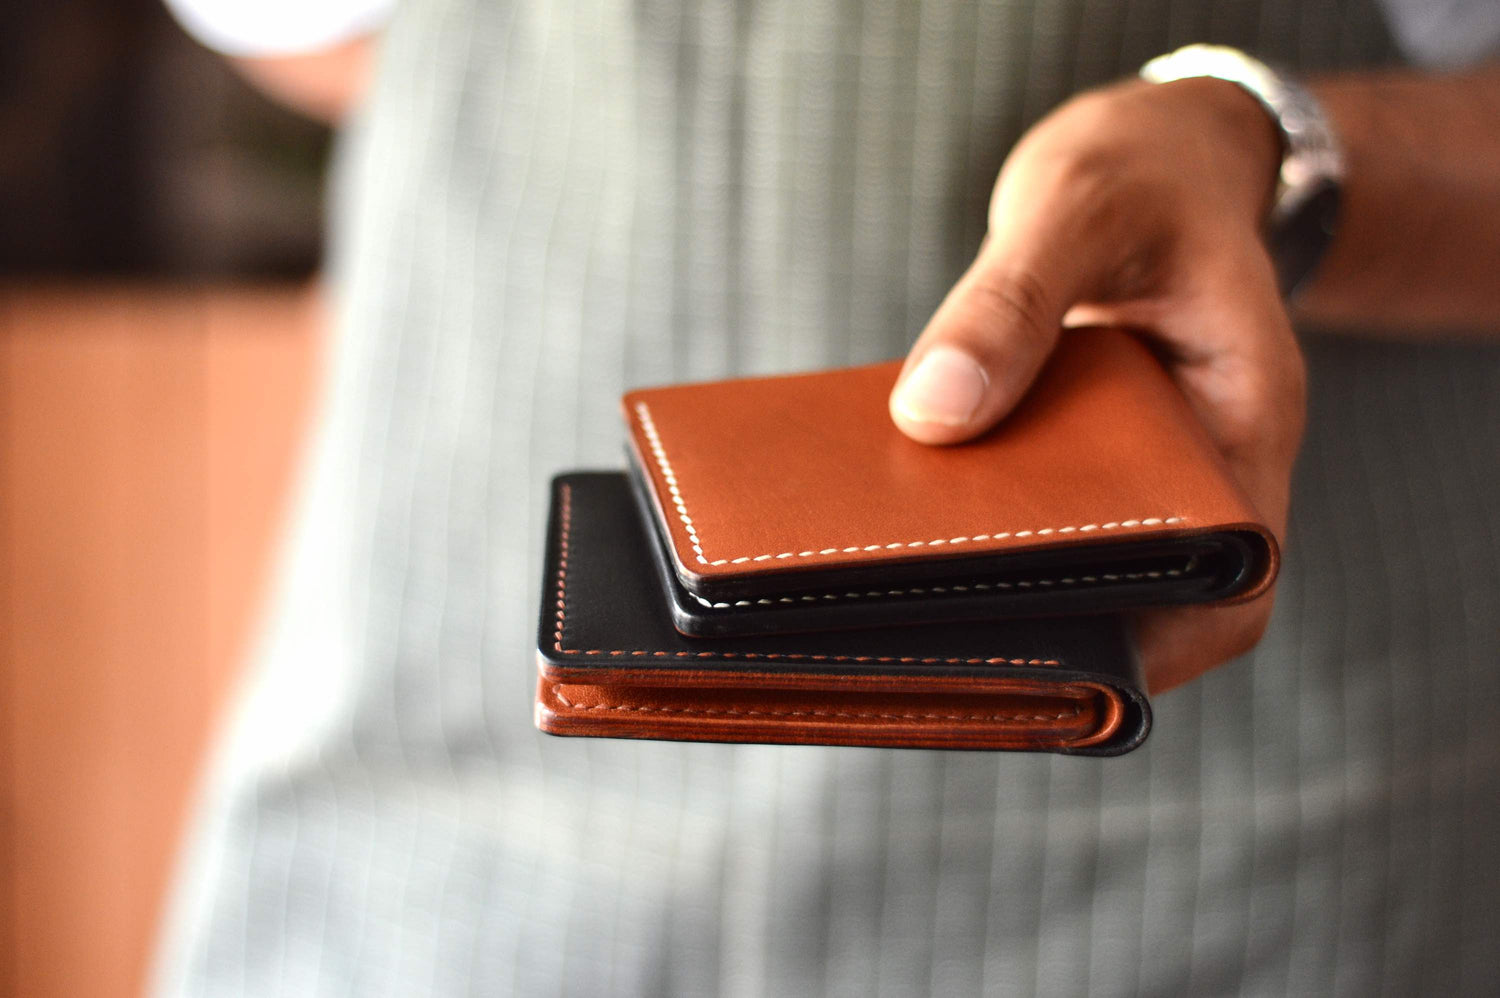 6 Best Wallets 2019 - Slim Wallets For Men You can buy Now On